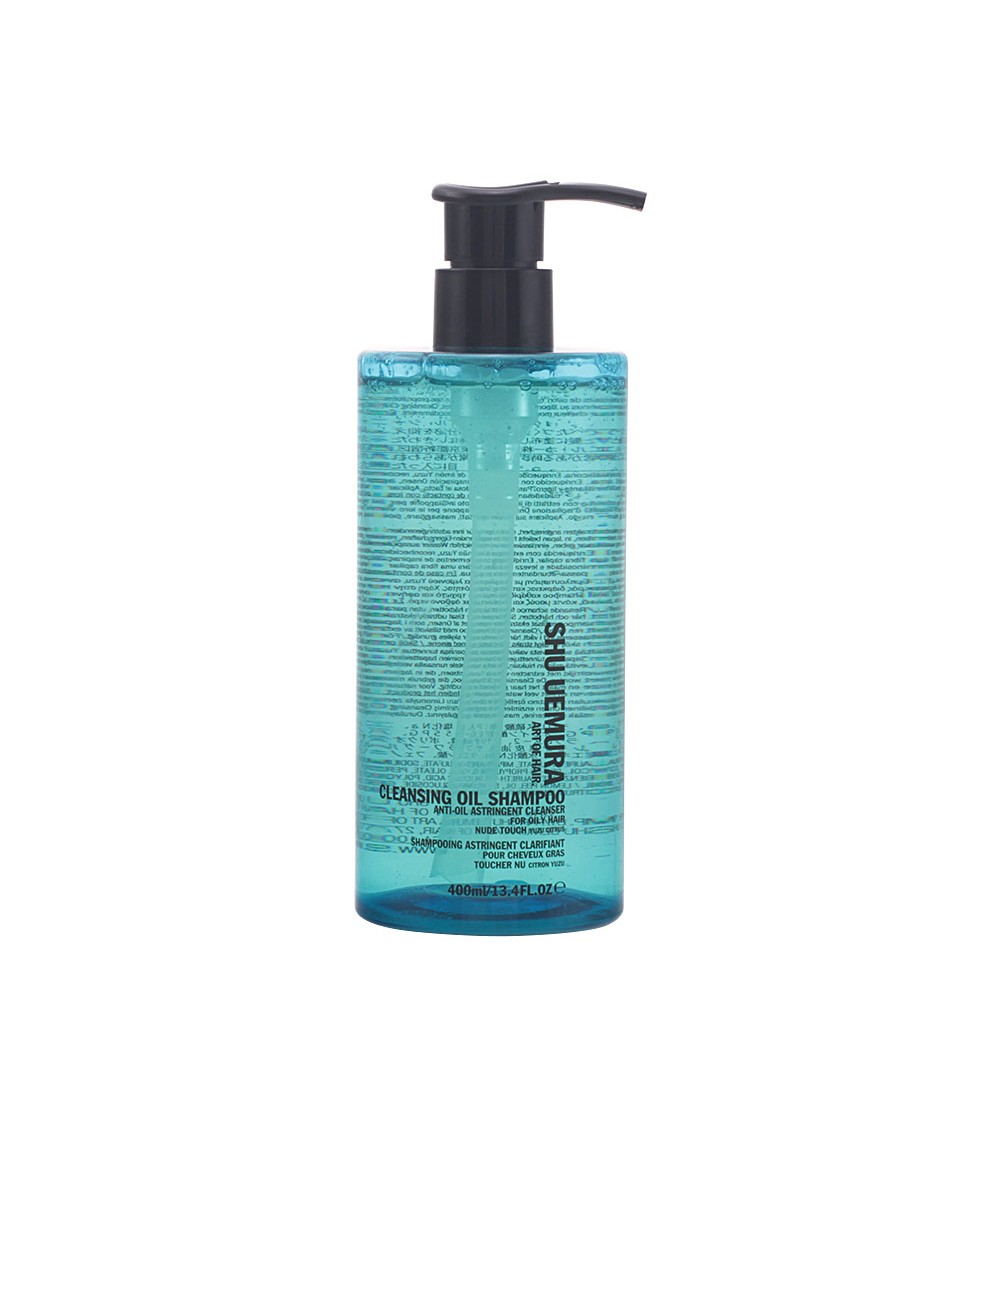 CLEANSING OIL Shampoing doux anti-oil astringent cleanser 400 ml